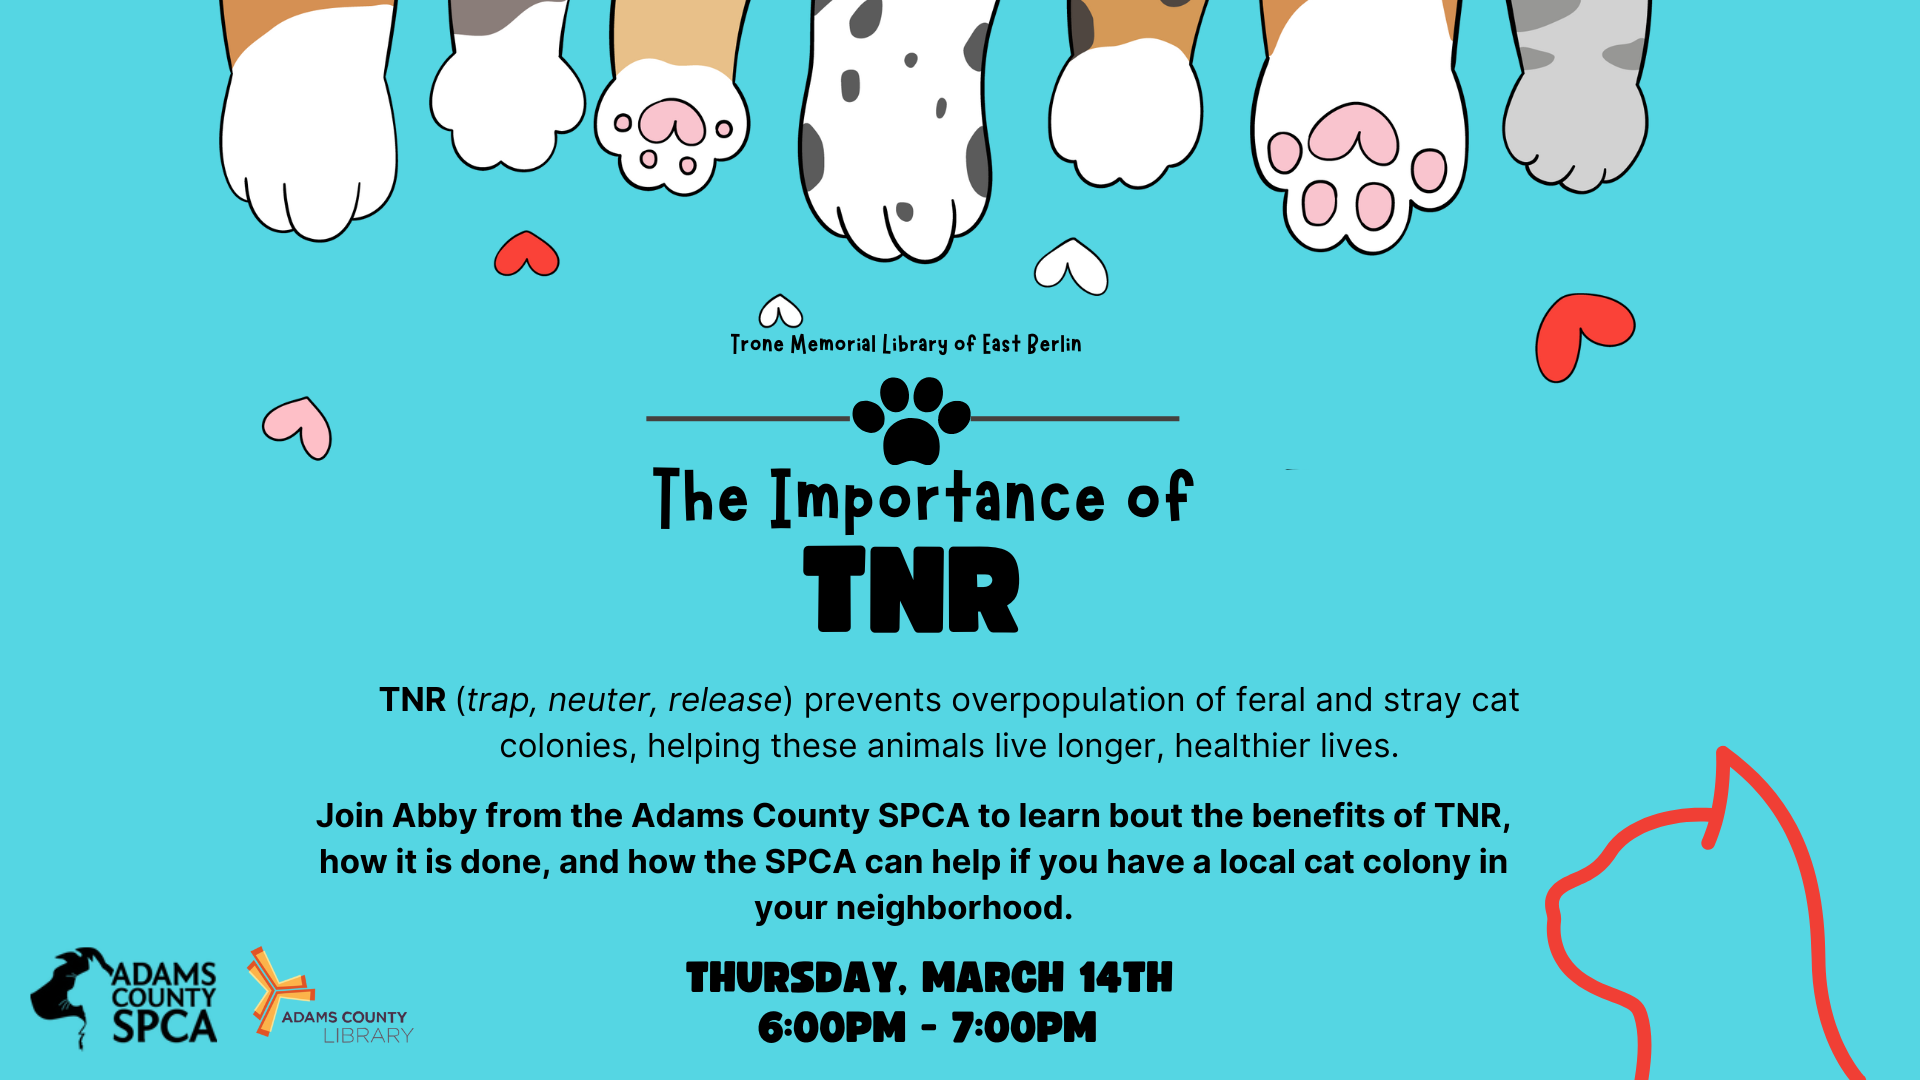 Flyer with information about The Importance of TNR.